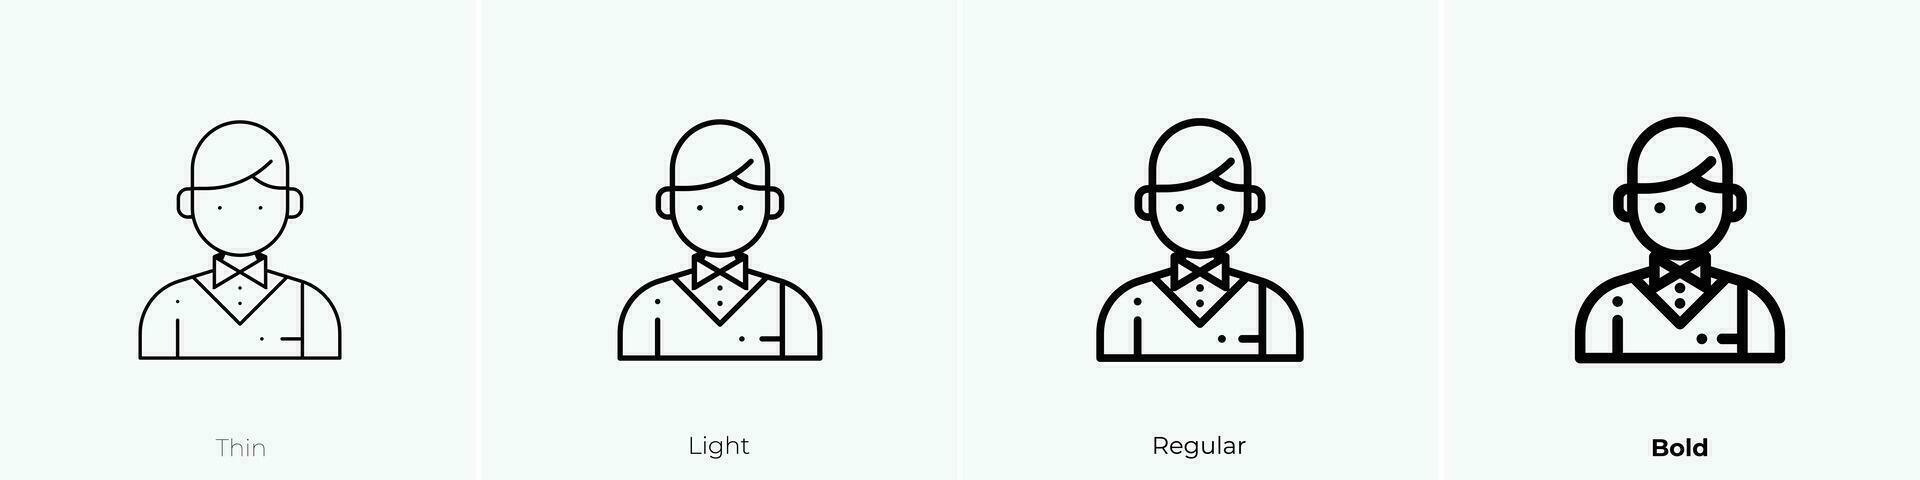 waiter icon. Thin, Light, Regular And Bold style design isolated on white background vector